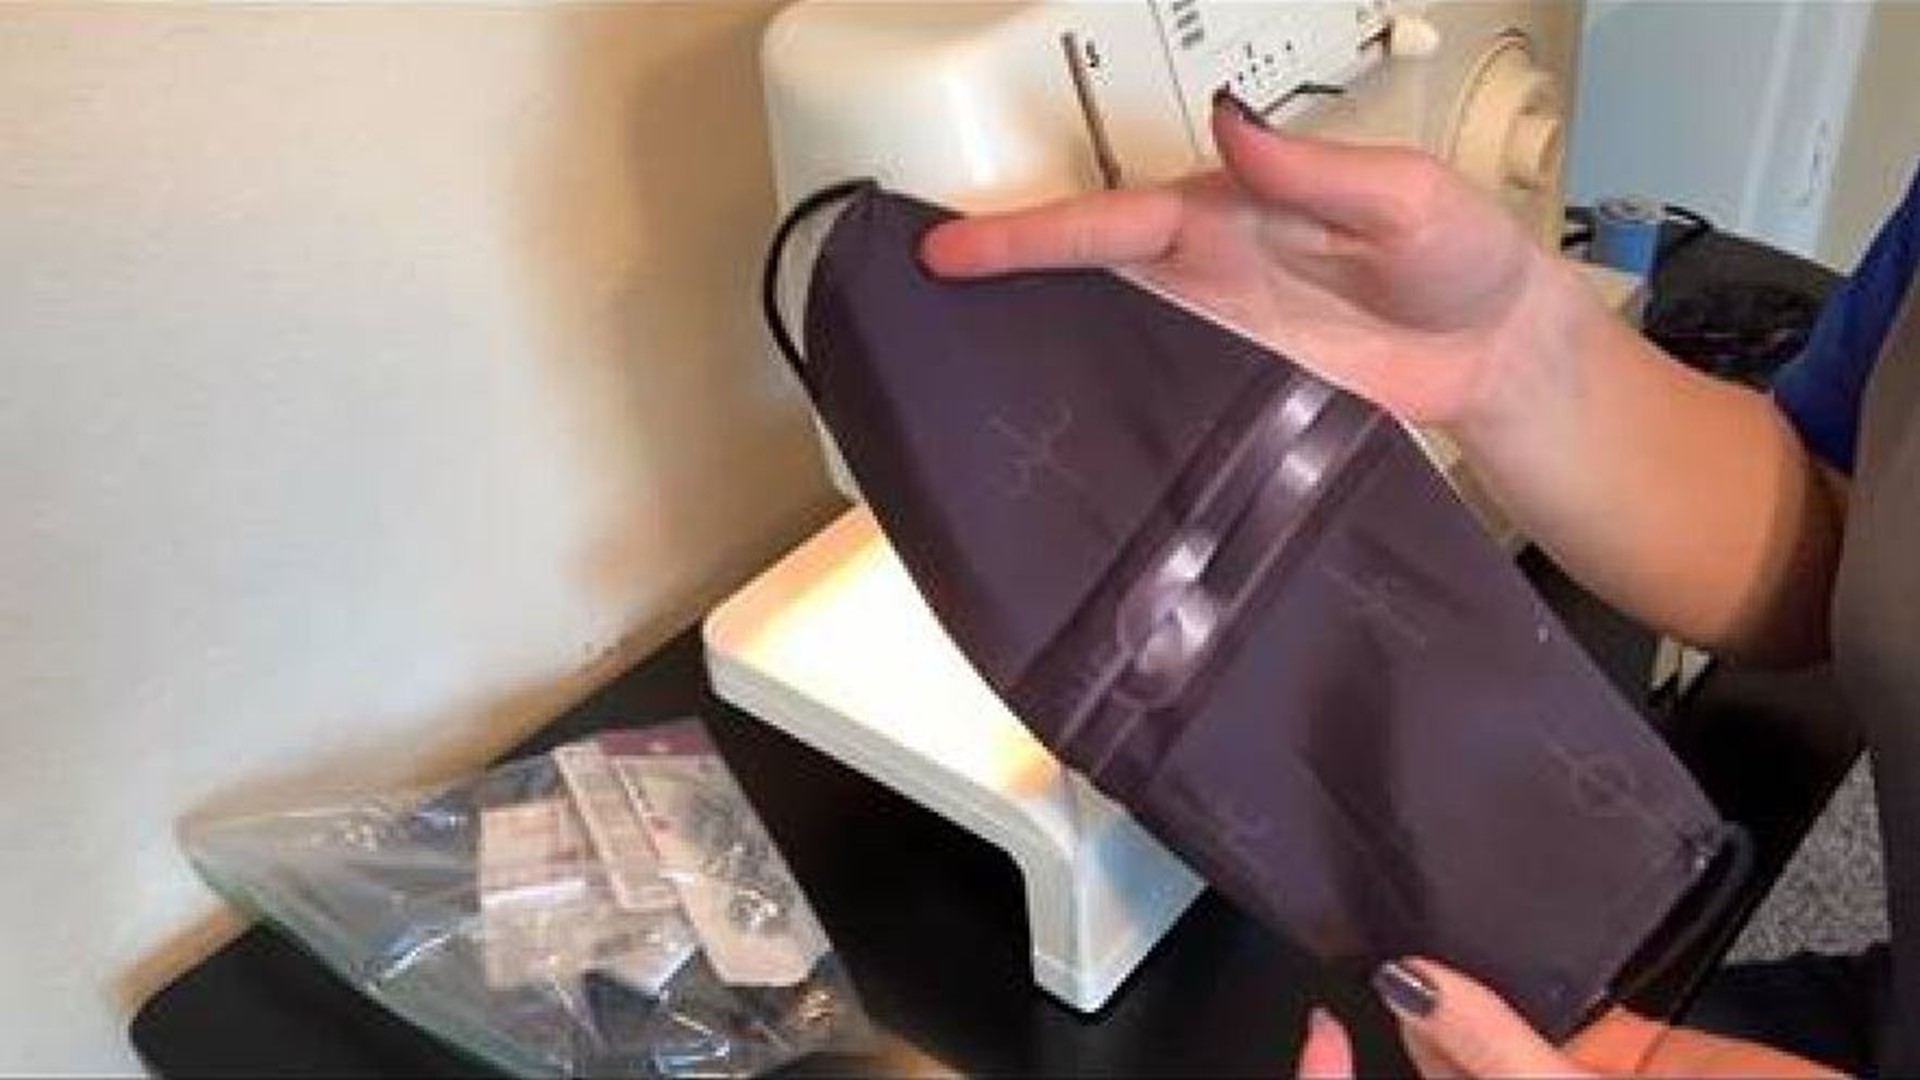 Amid the coronavirus pandemic, the CDC recommends wearing a face covering when out in public. Digital Journalist Megan Ball shares how to make a hand-sewn mask.